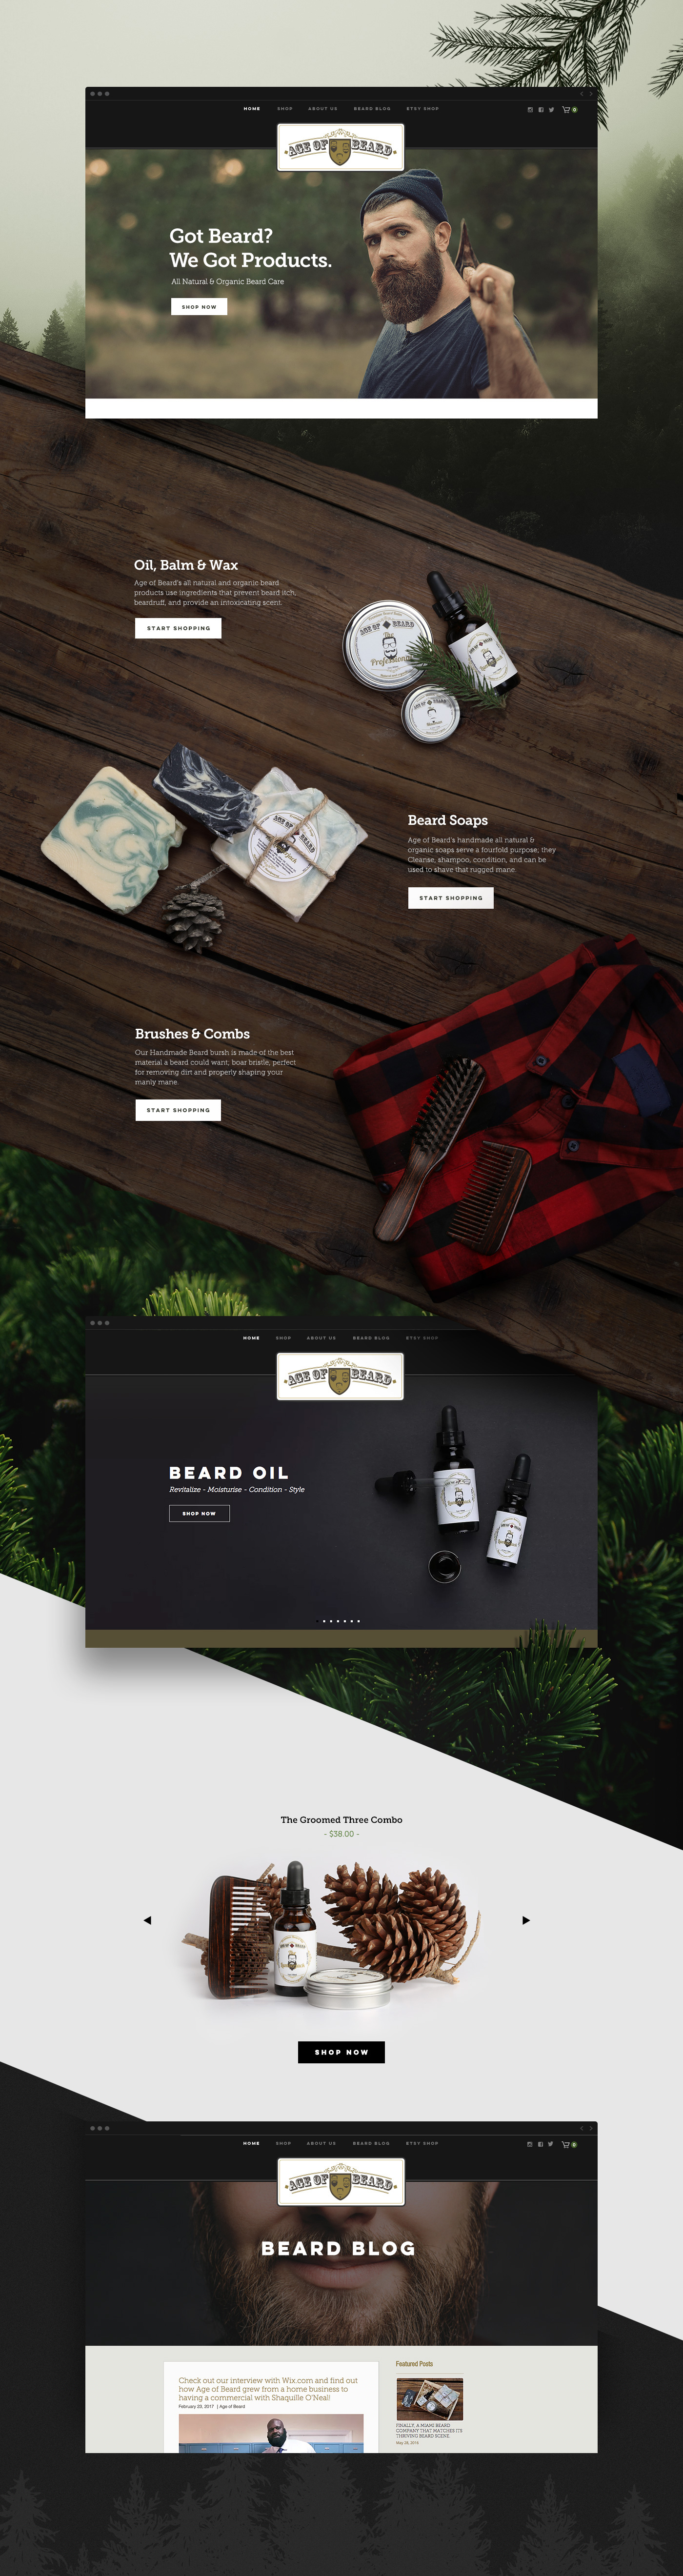 beard hair products ad commercial template wix.com wix Web